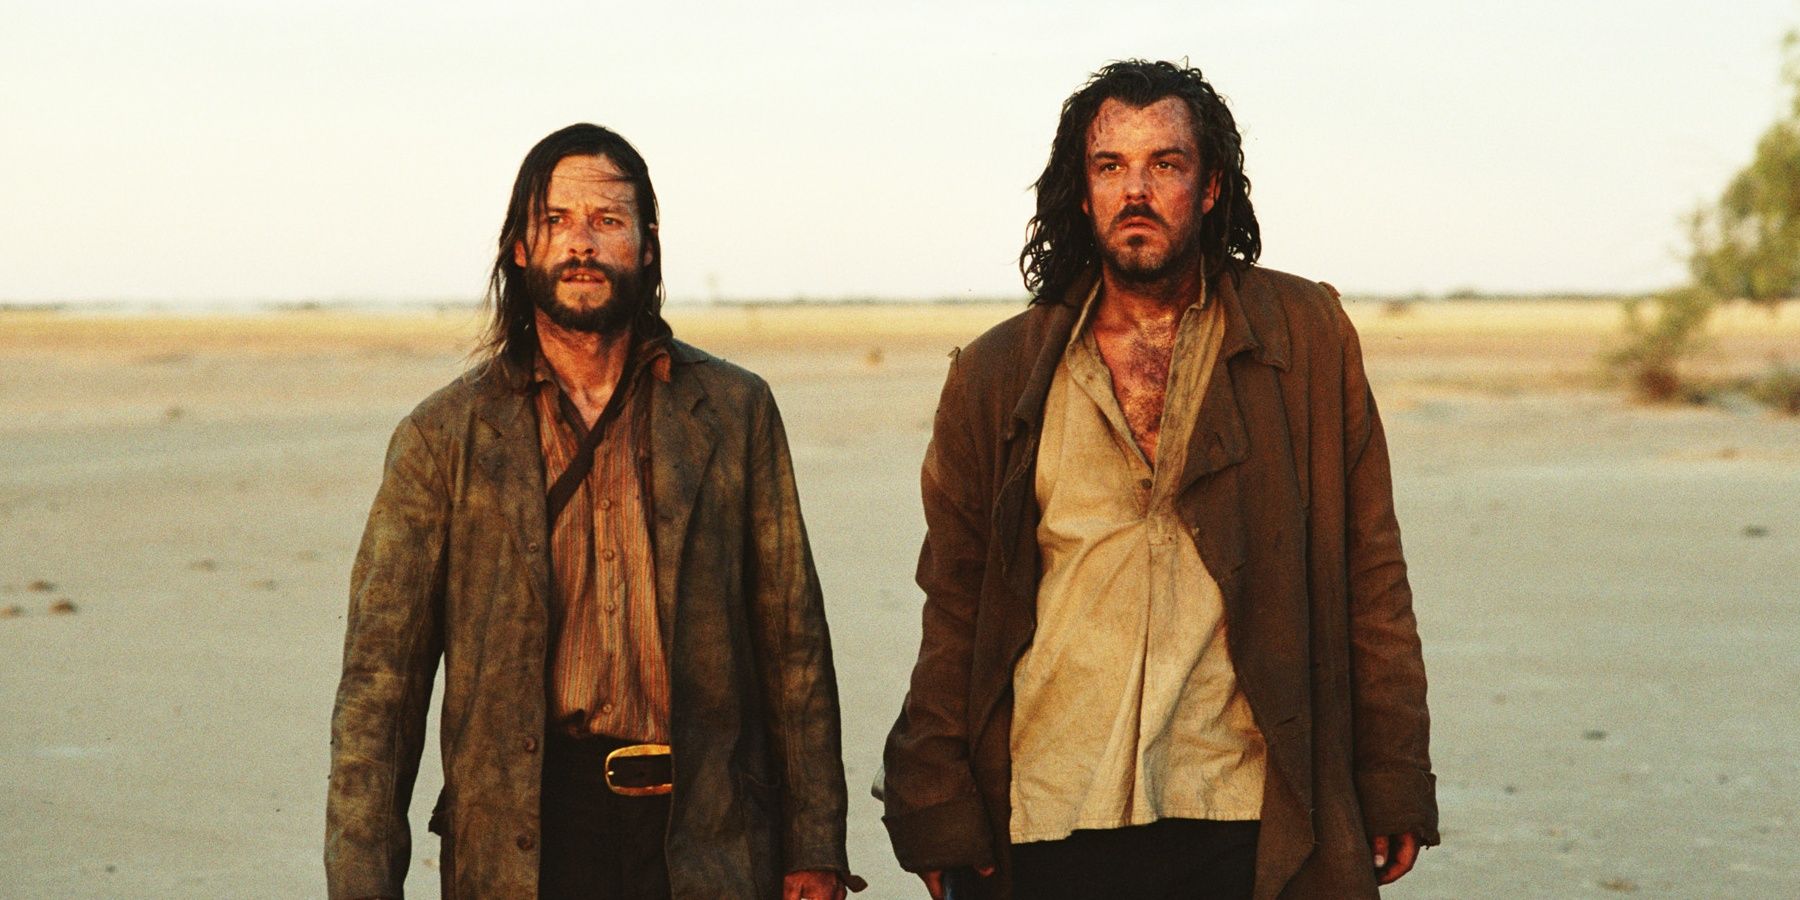 Guy Pearce and Ray Winstone walking somewhere in The Proposition